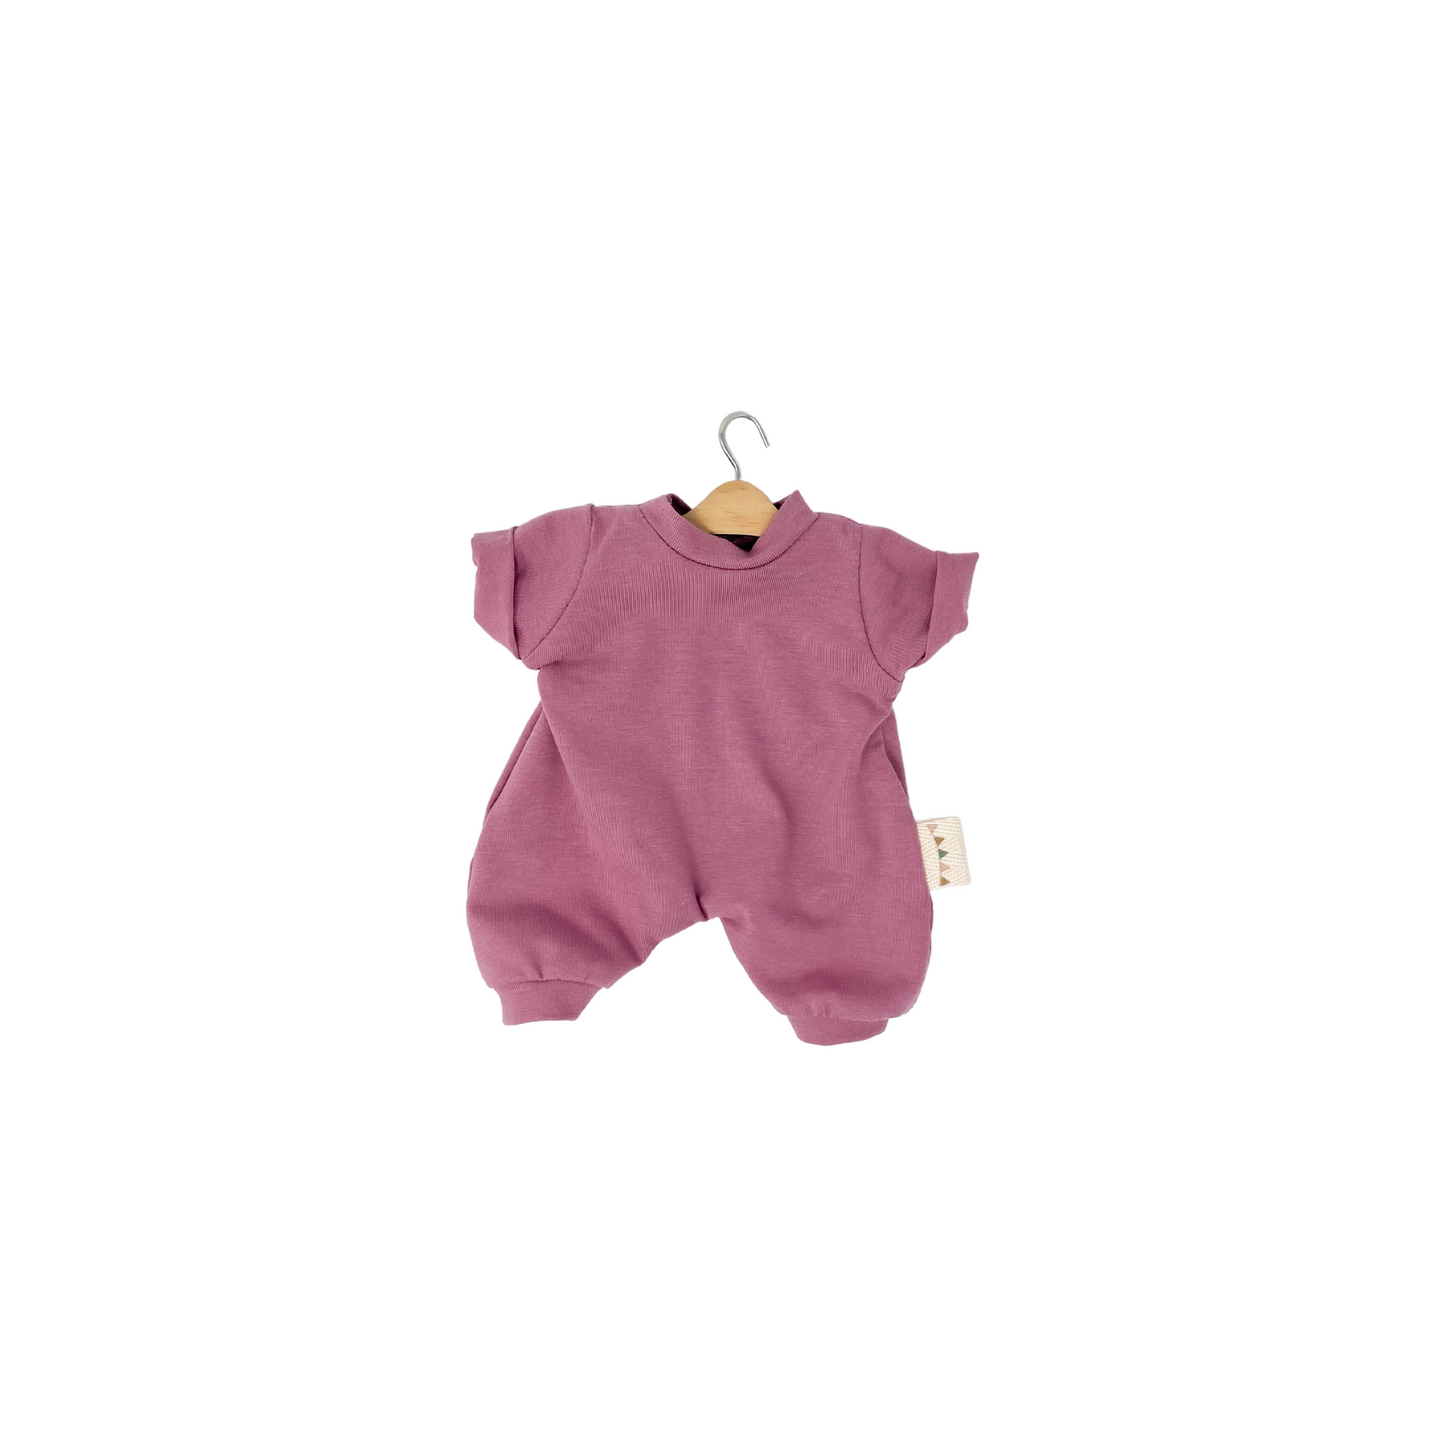 Sootie Bunny + Basic Romper in Pink Mauve